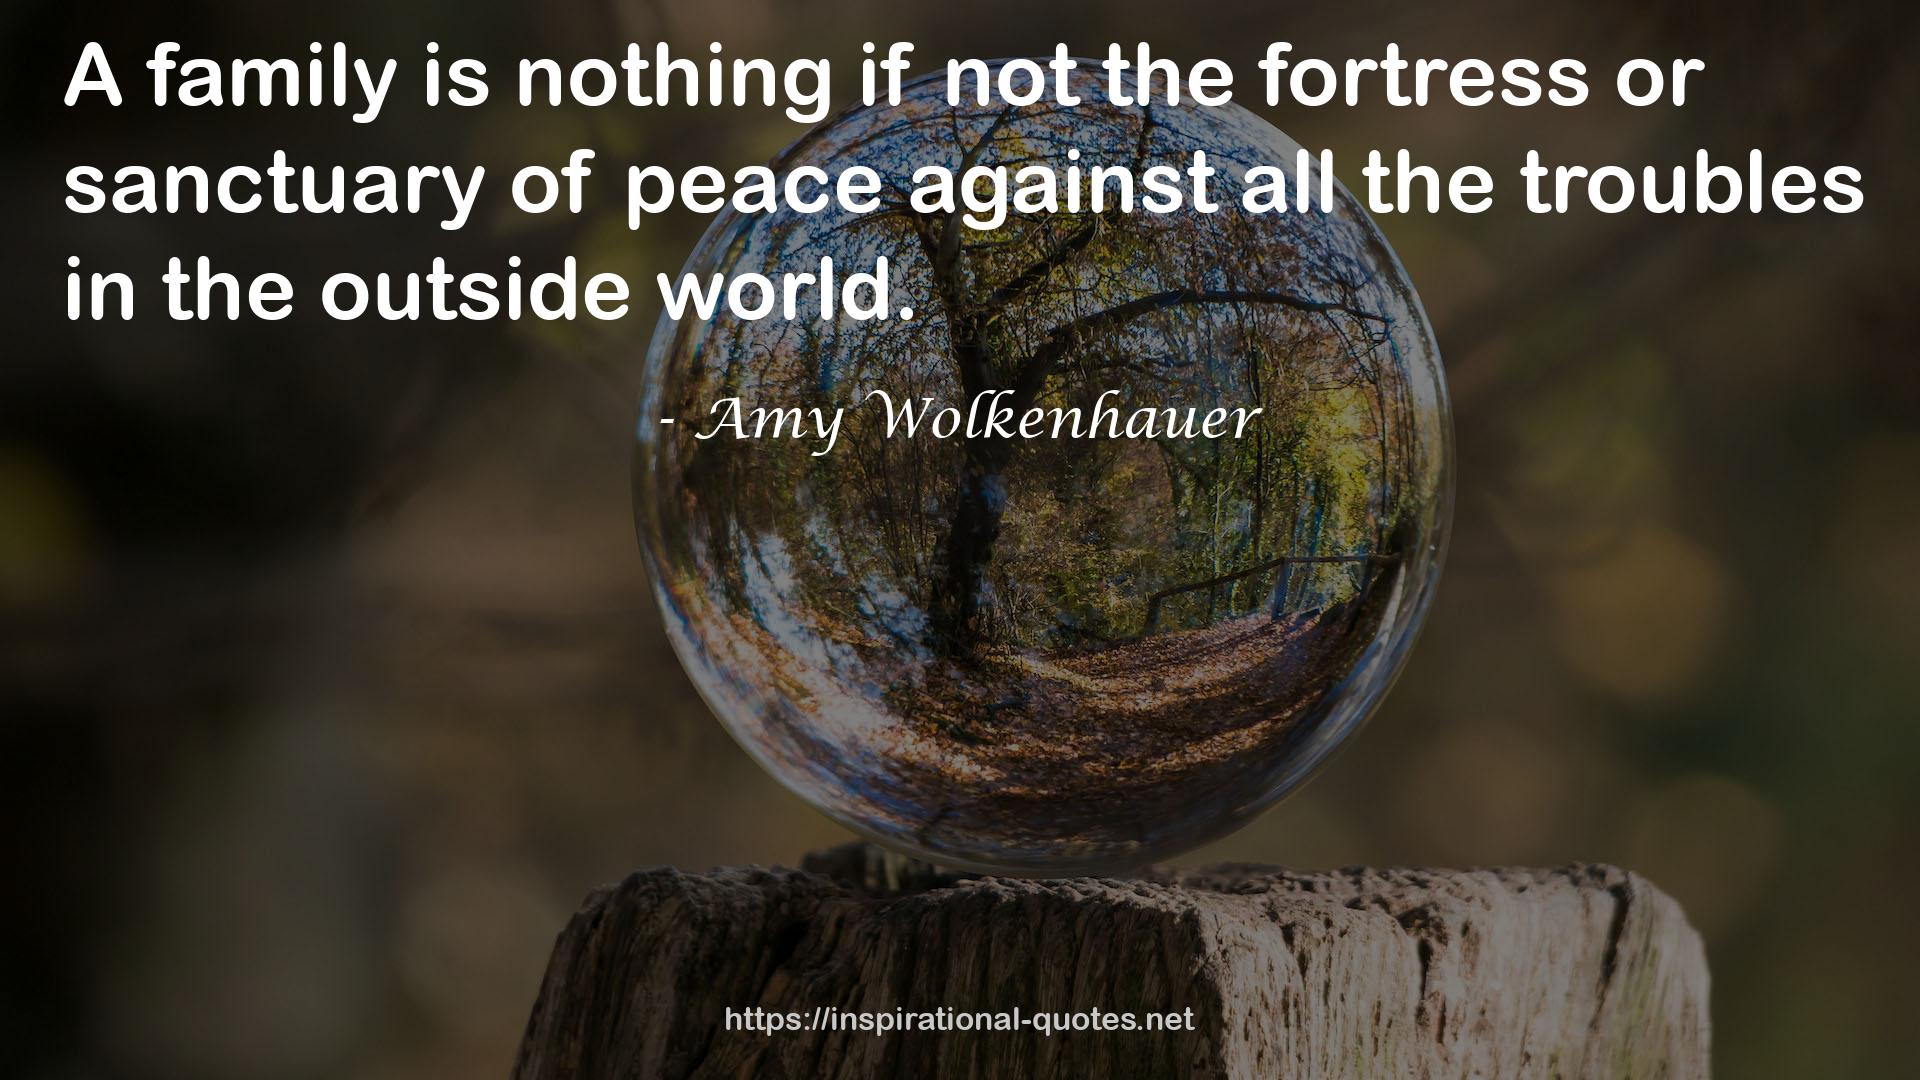 Amy Wolkenhauer QUOTES